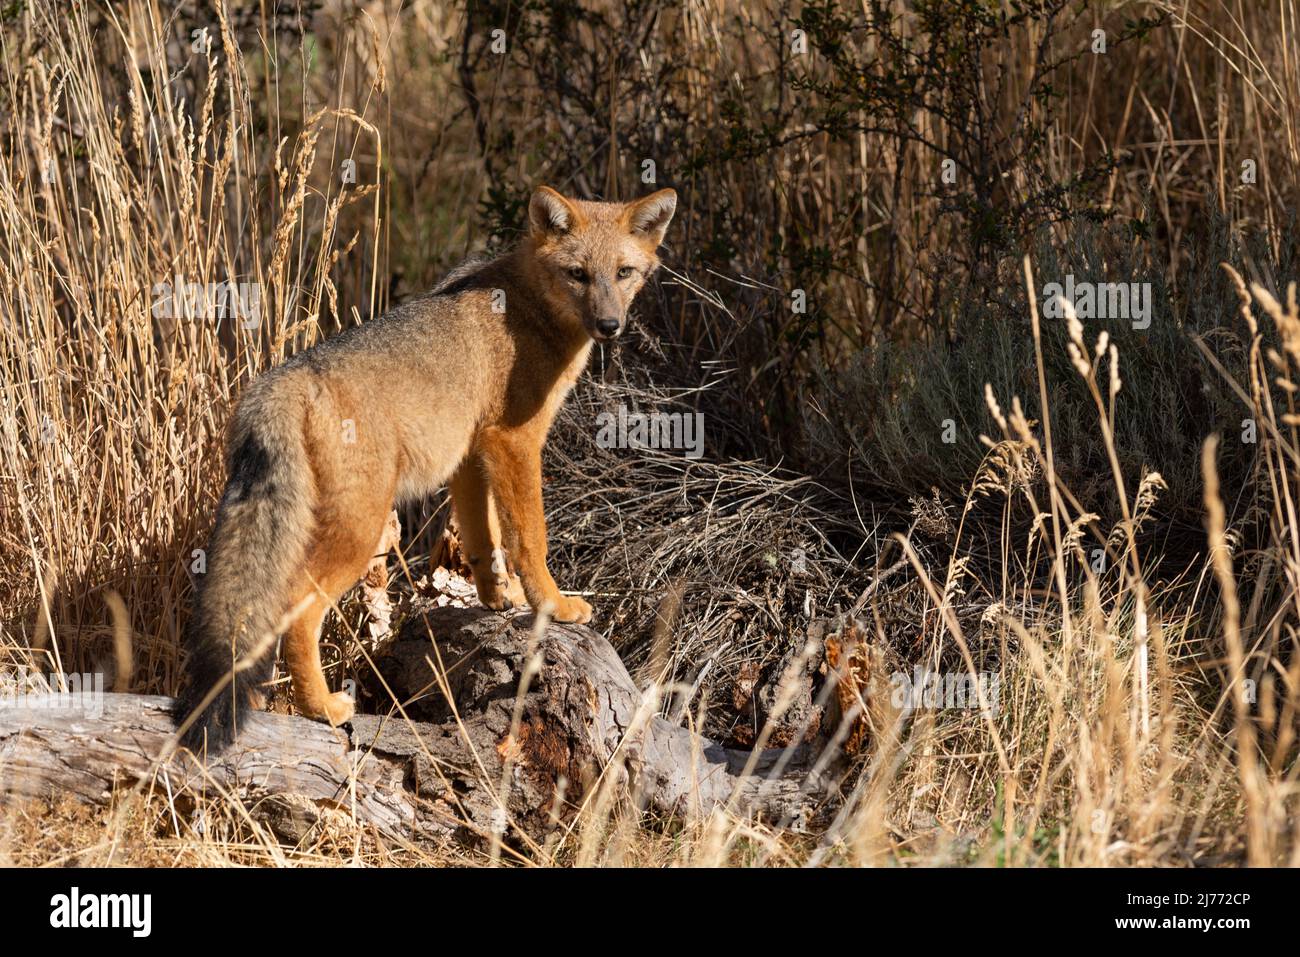 A Culpeo Fox in Torres del Paine NP Stock Photo